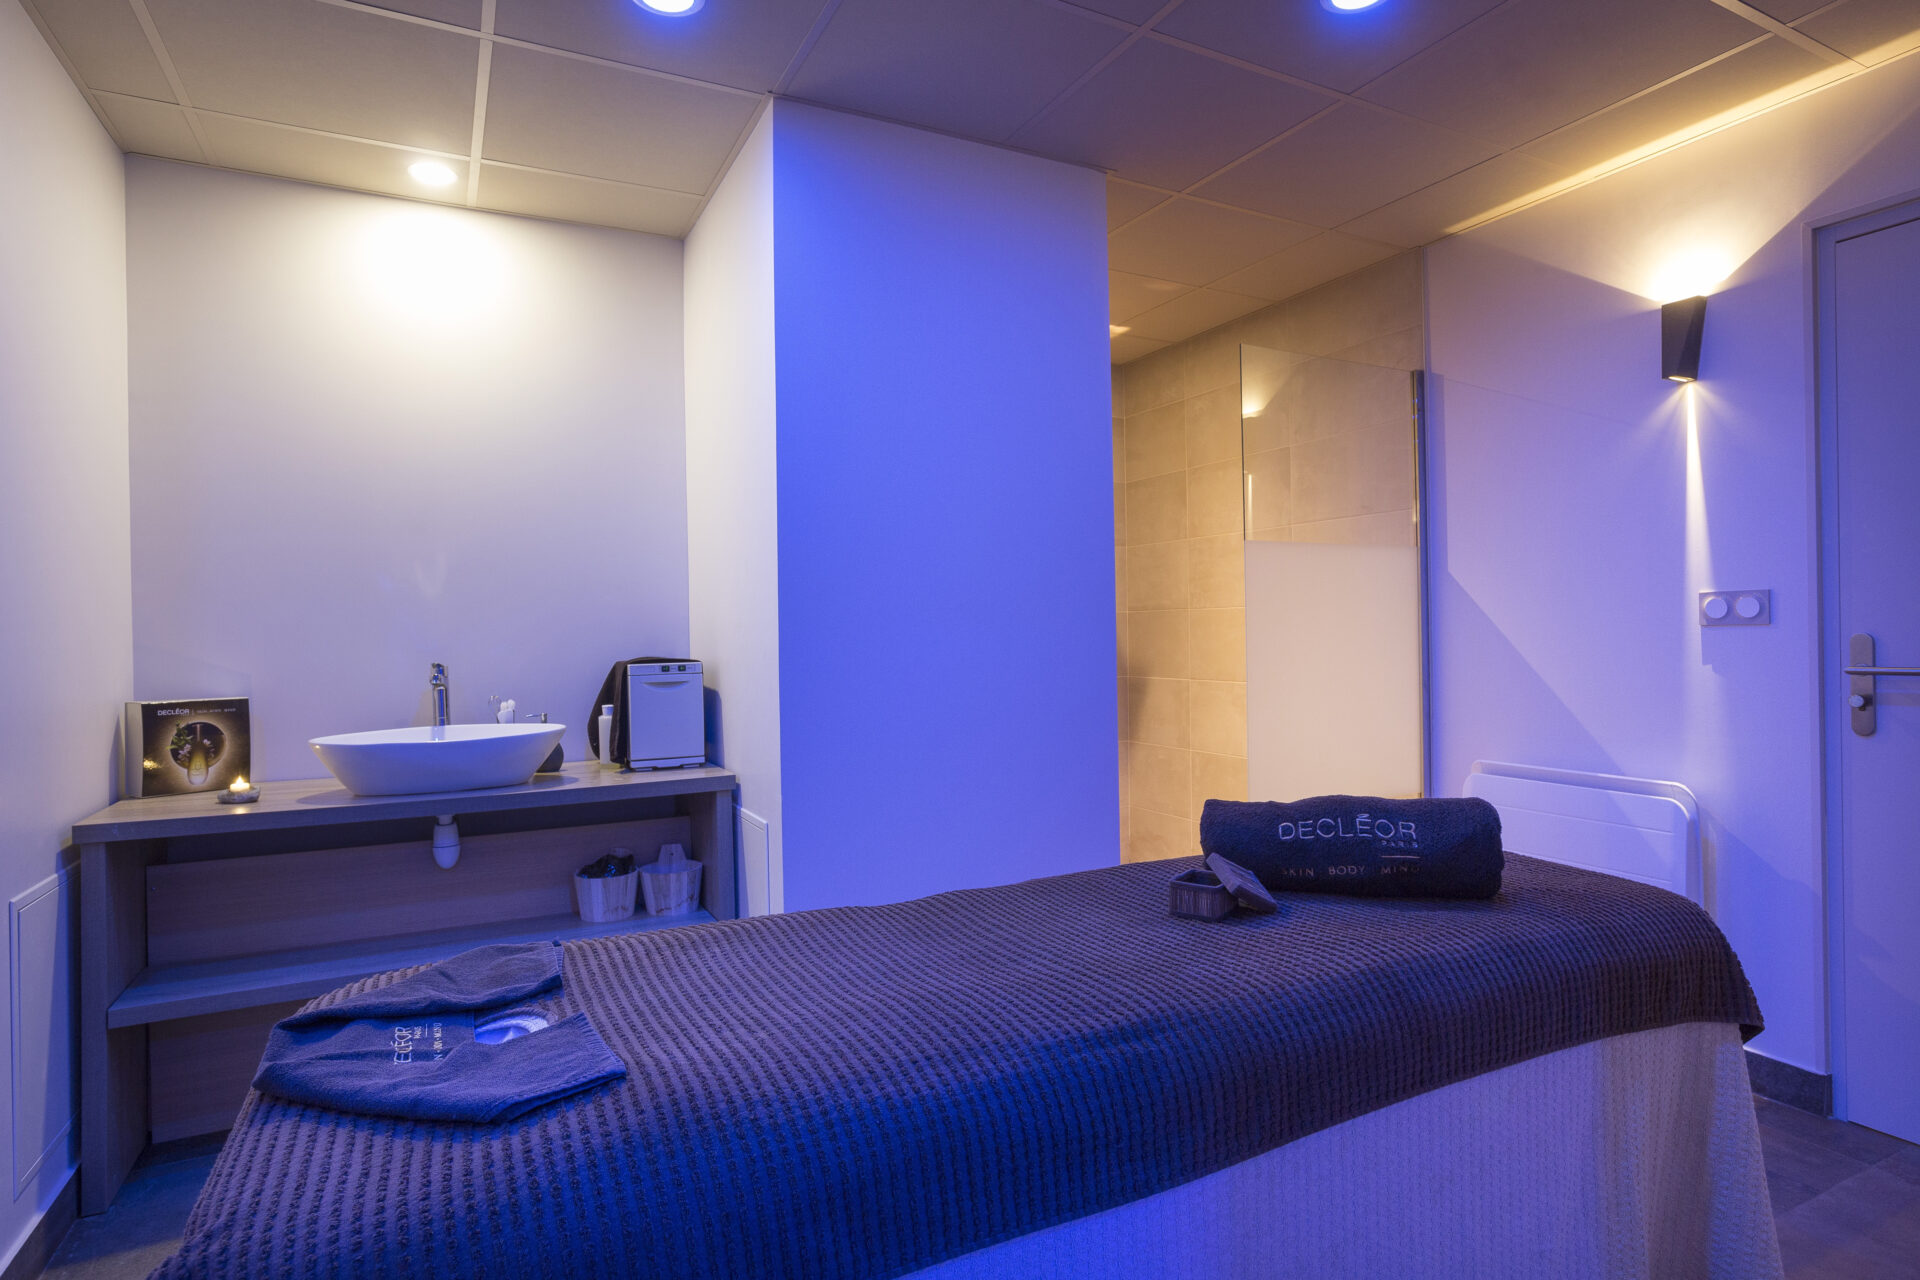 The massage room in the hotel club